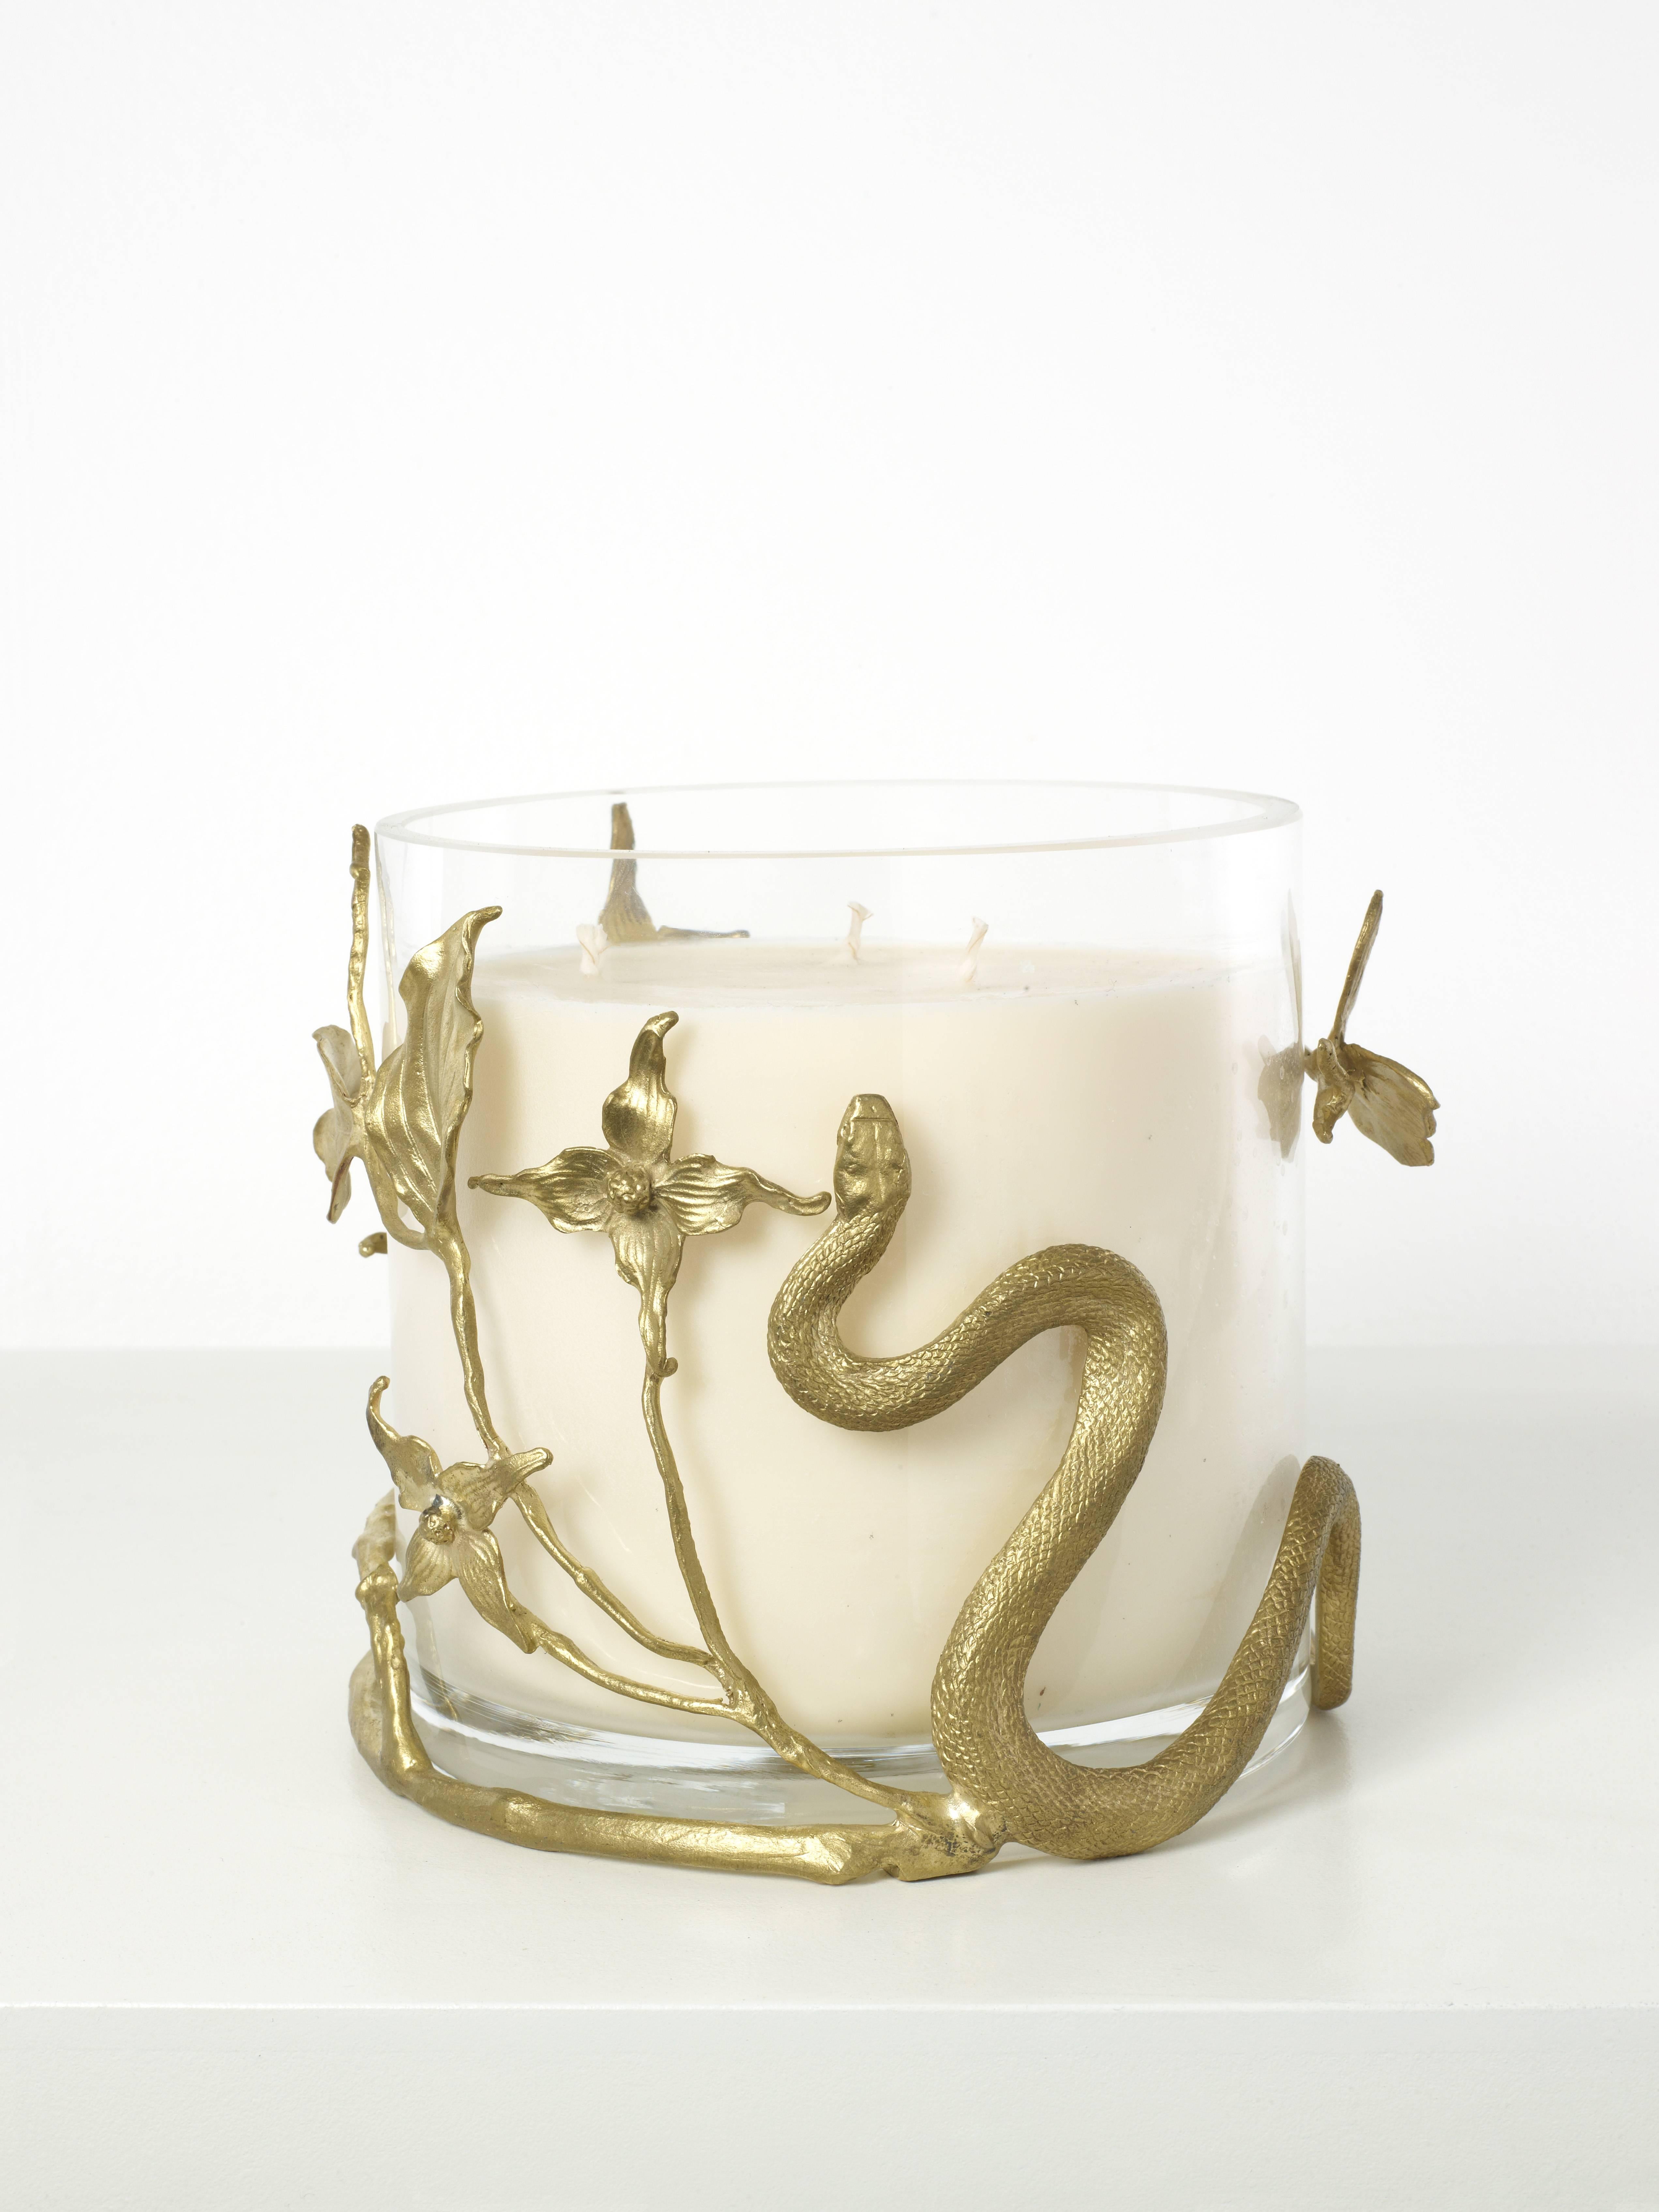 Honeysuckle Candle - Art by Claude Lalanne